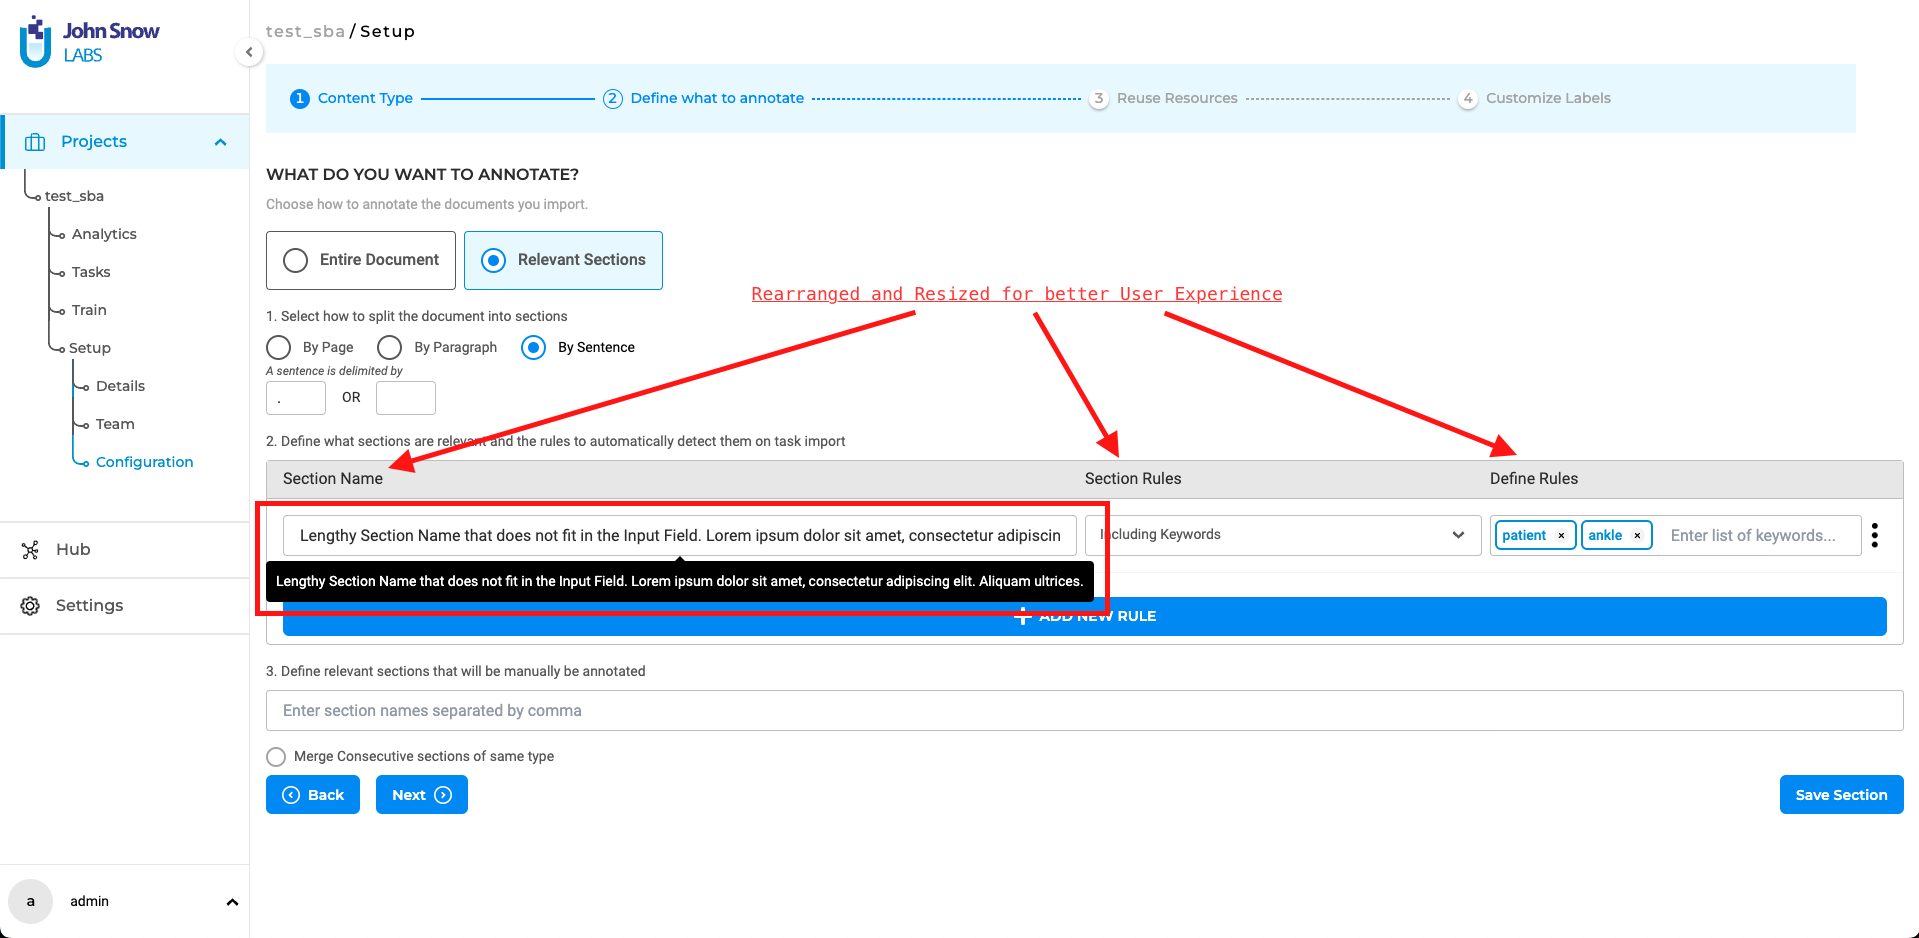 Reorder, Resize and add tooltips for SBA configurations